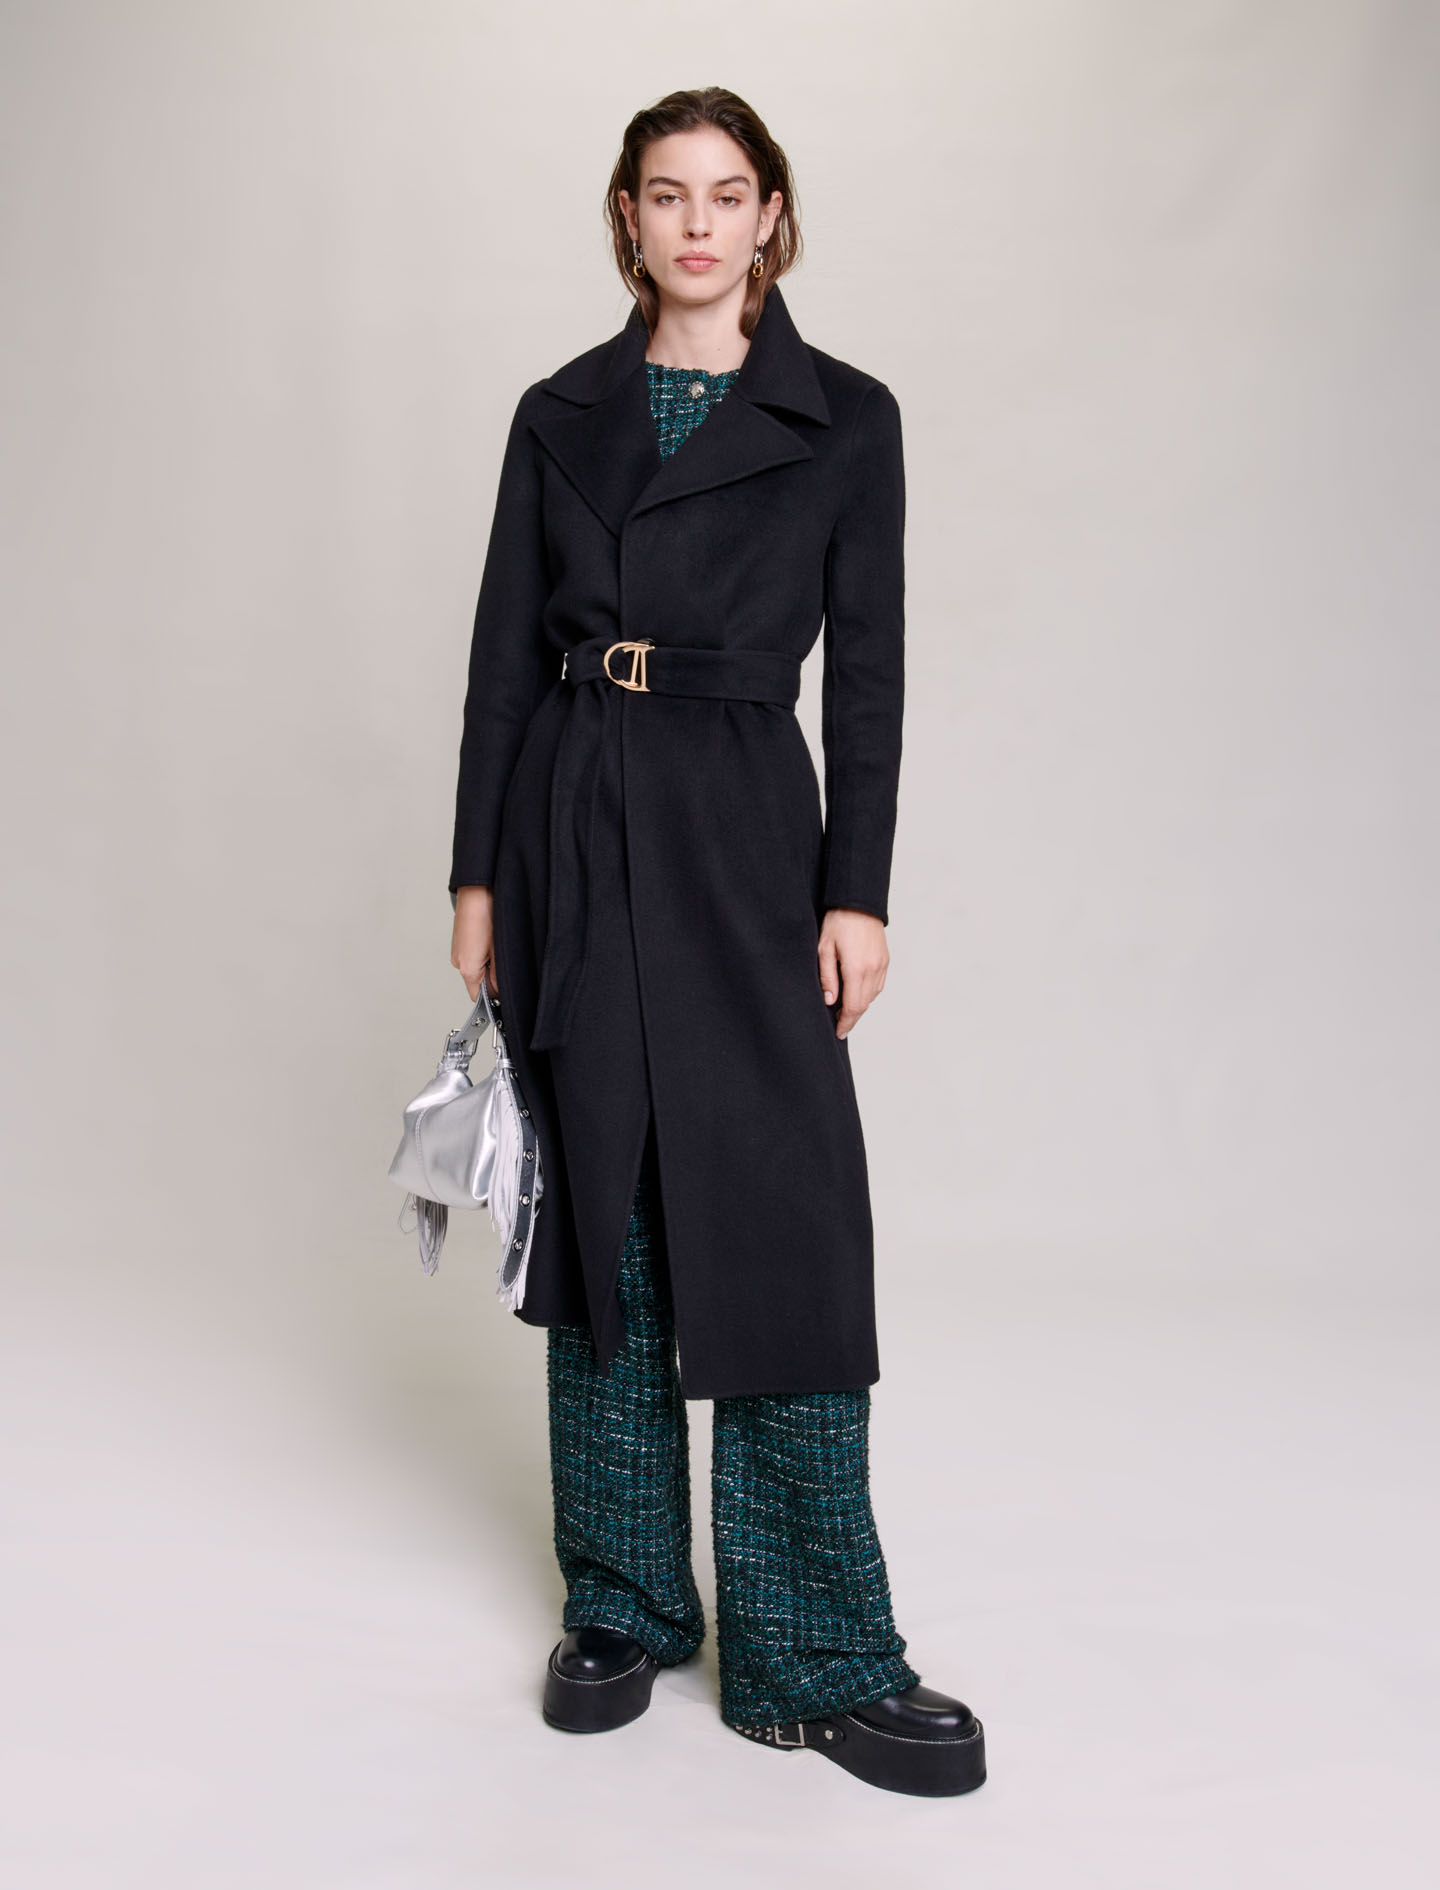 Maje Woman's wool, Belted double-faced coat for Fall/Winter, in color Black / Black